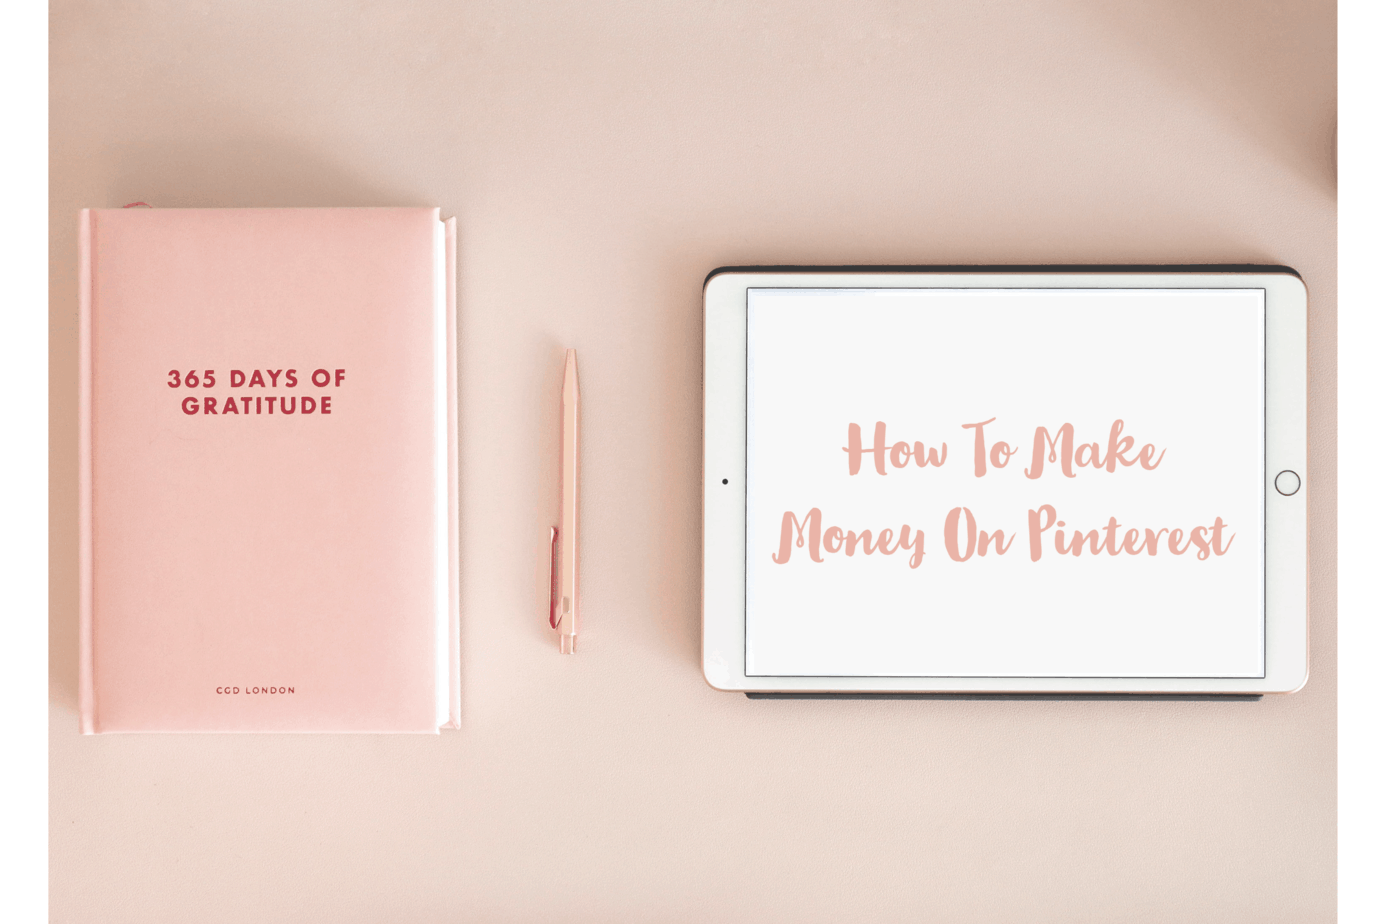 How To Make Money On Pinterest: Step by Step Guide